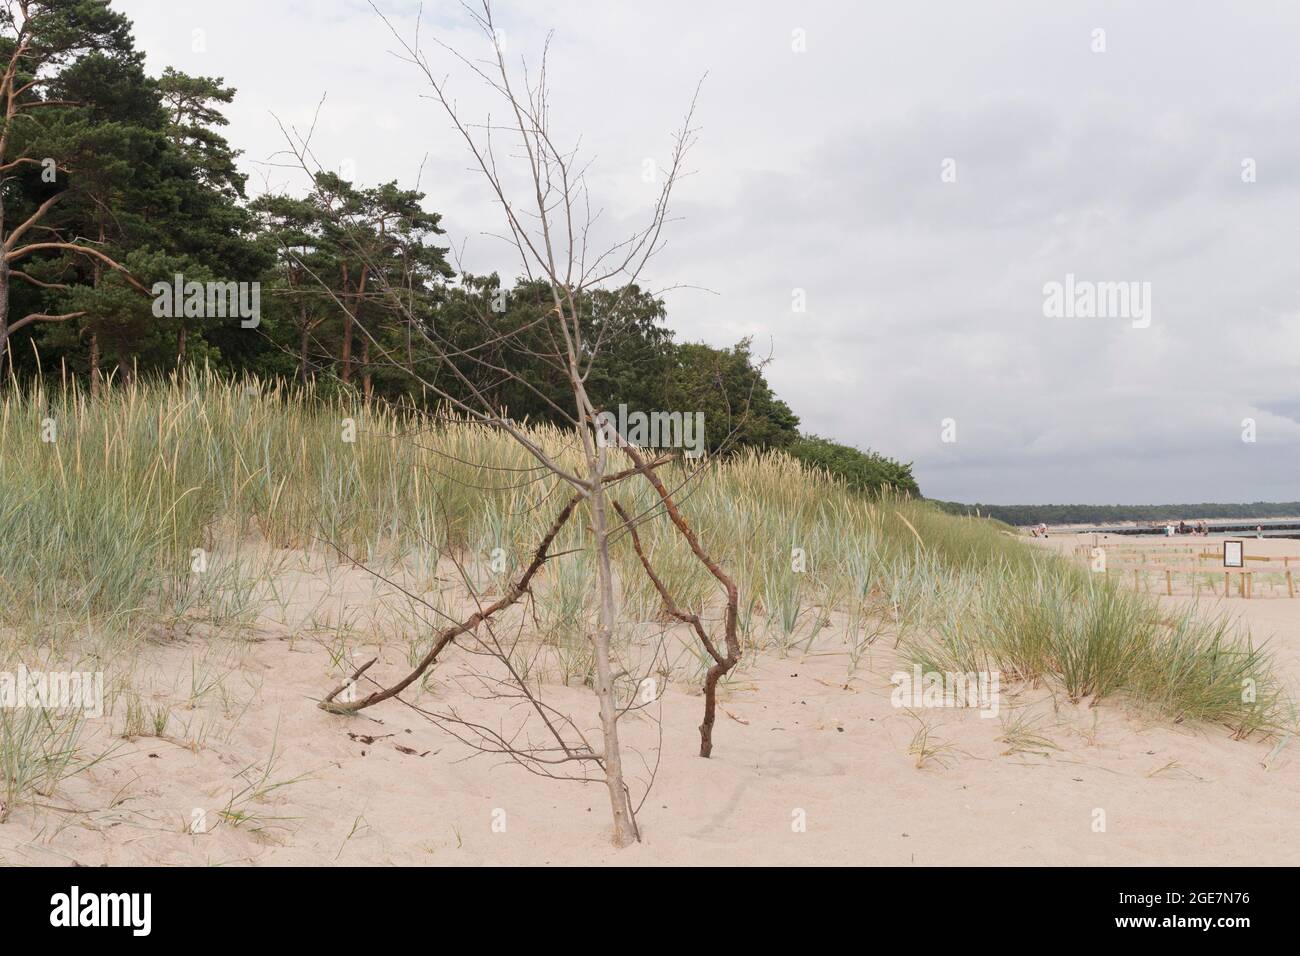 Beautiful white sand beach with clouds in south western part of Sweden. Location is Ystad, Sweden. Stock Photo